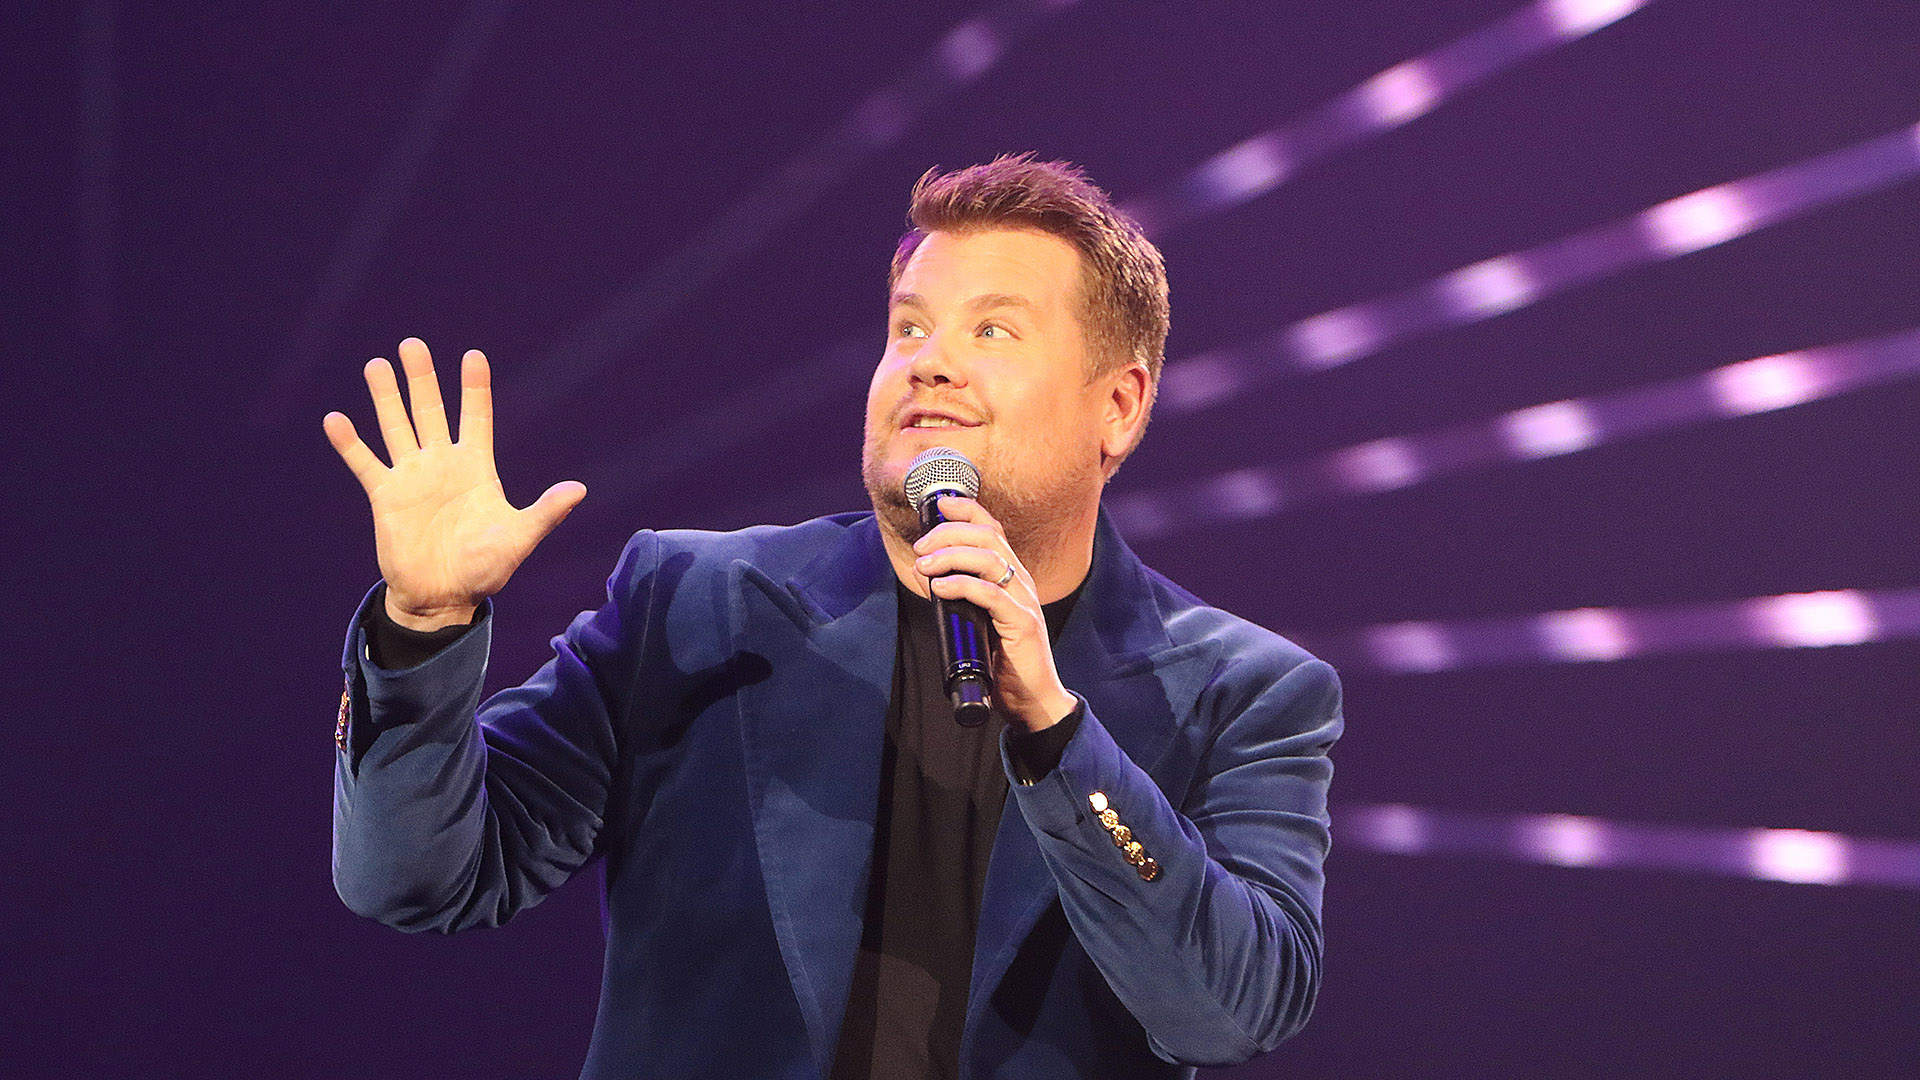 The Real Reason James Corden is Leaving The Late Late Show (No, He Wasn't Fired)